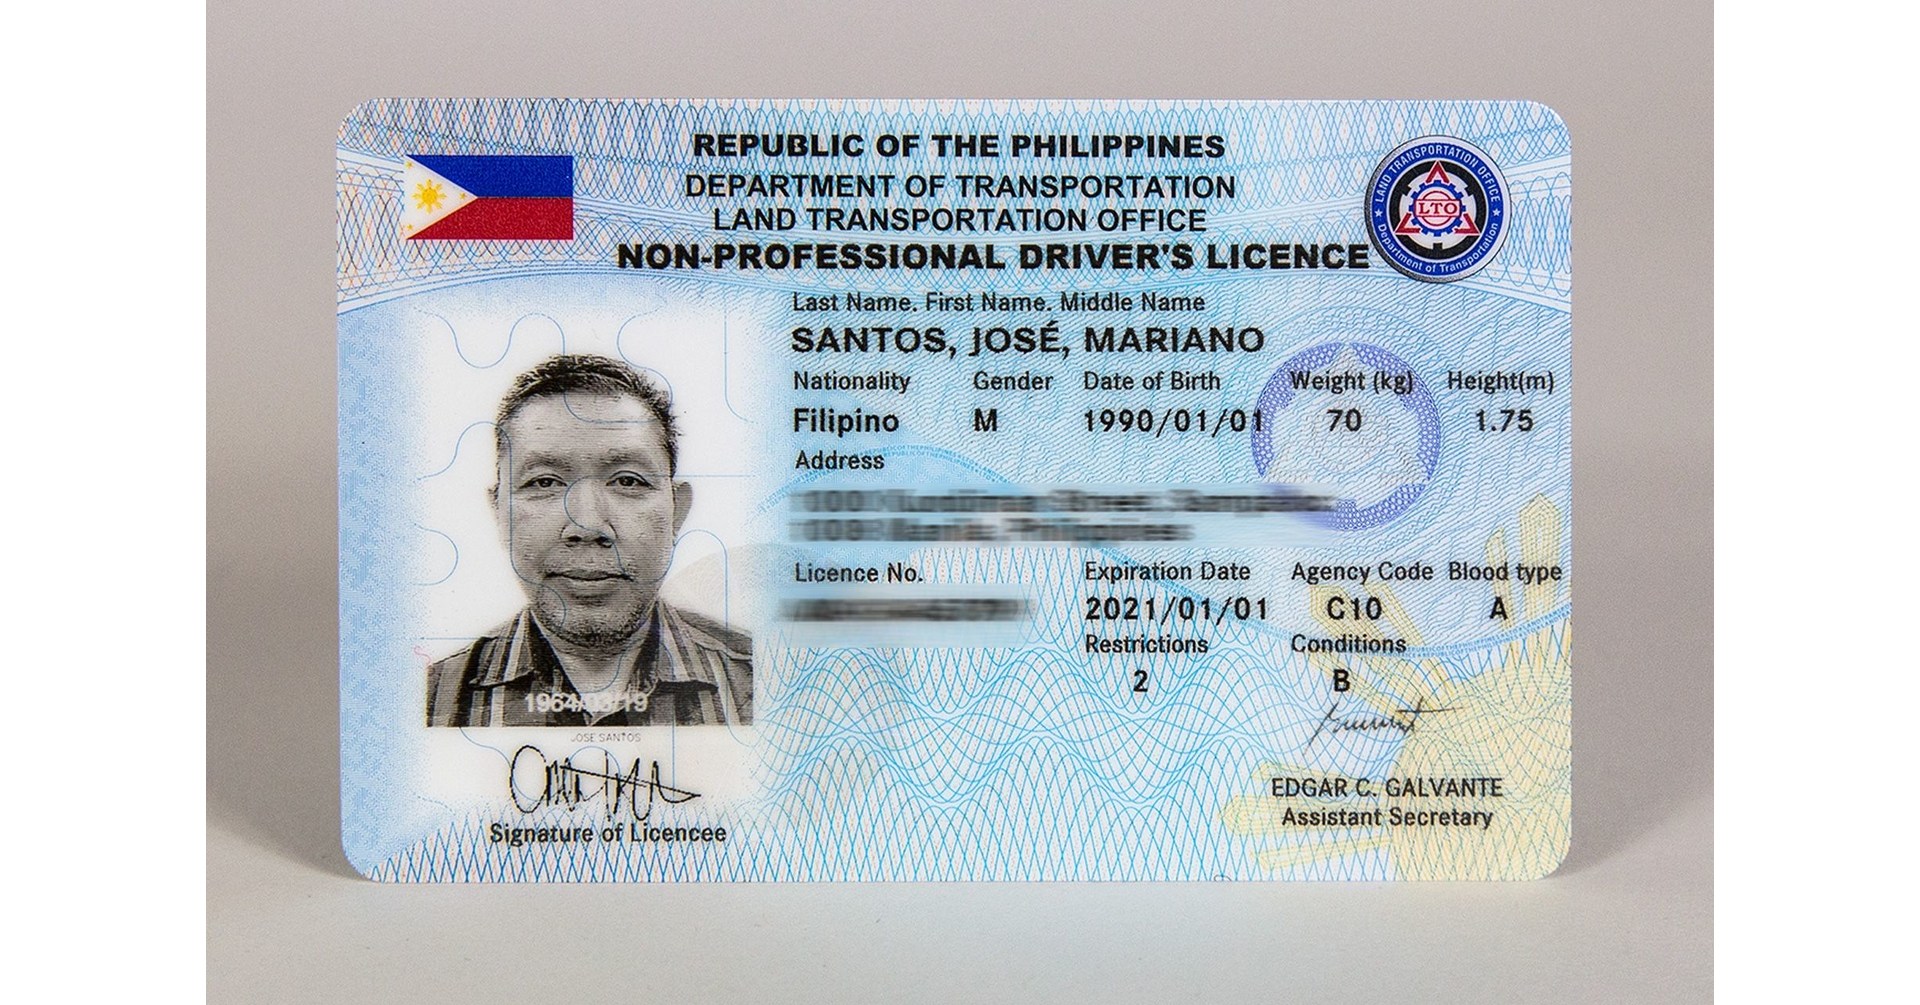 New Biometric Driver's License for the Philippines